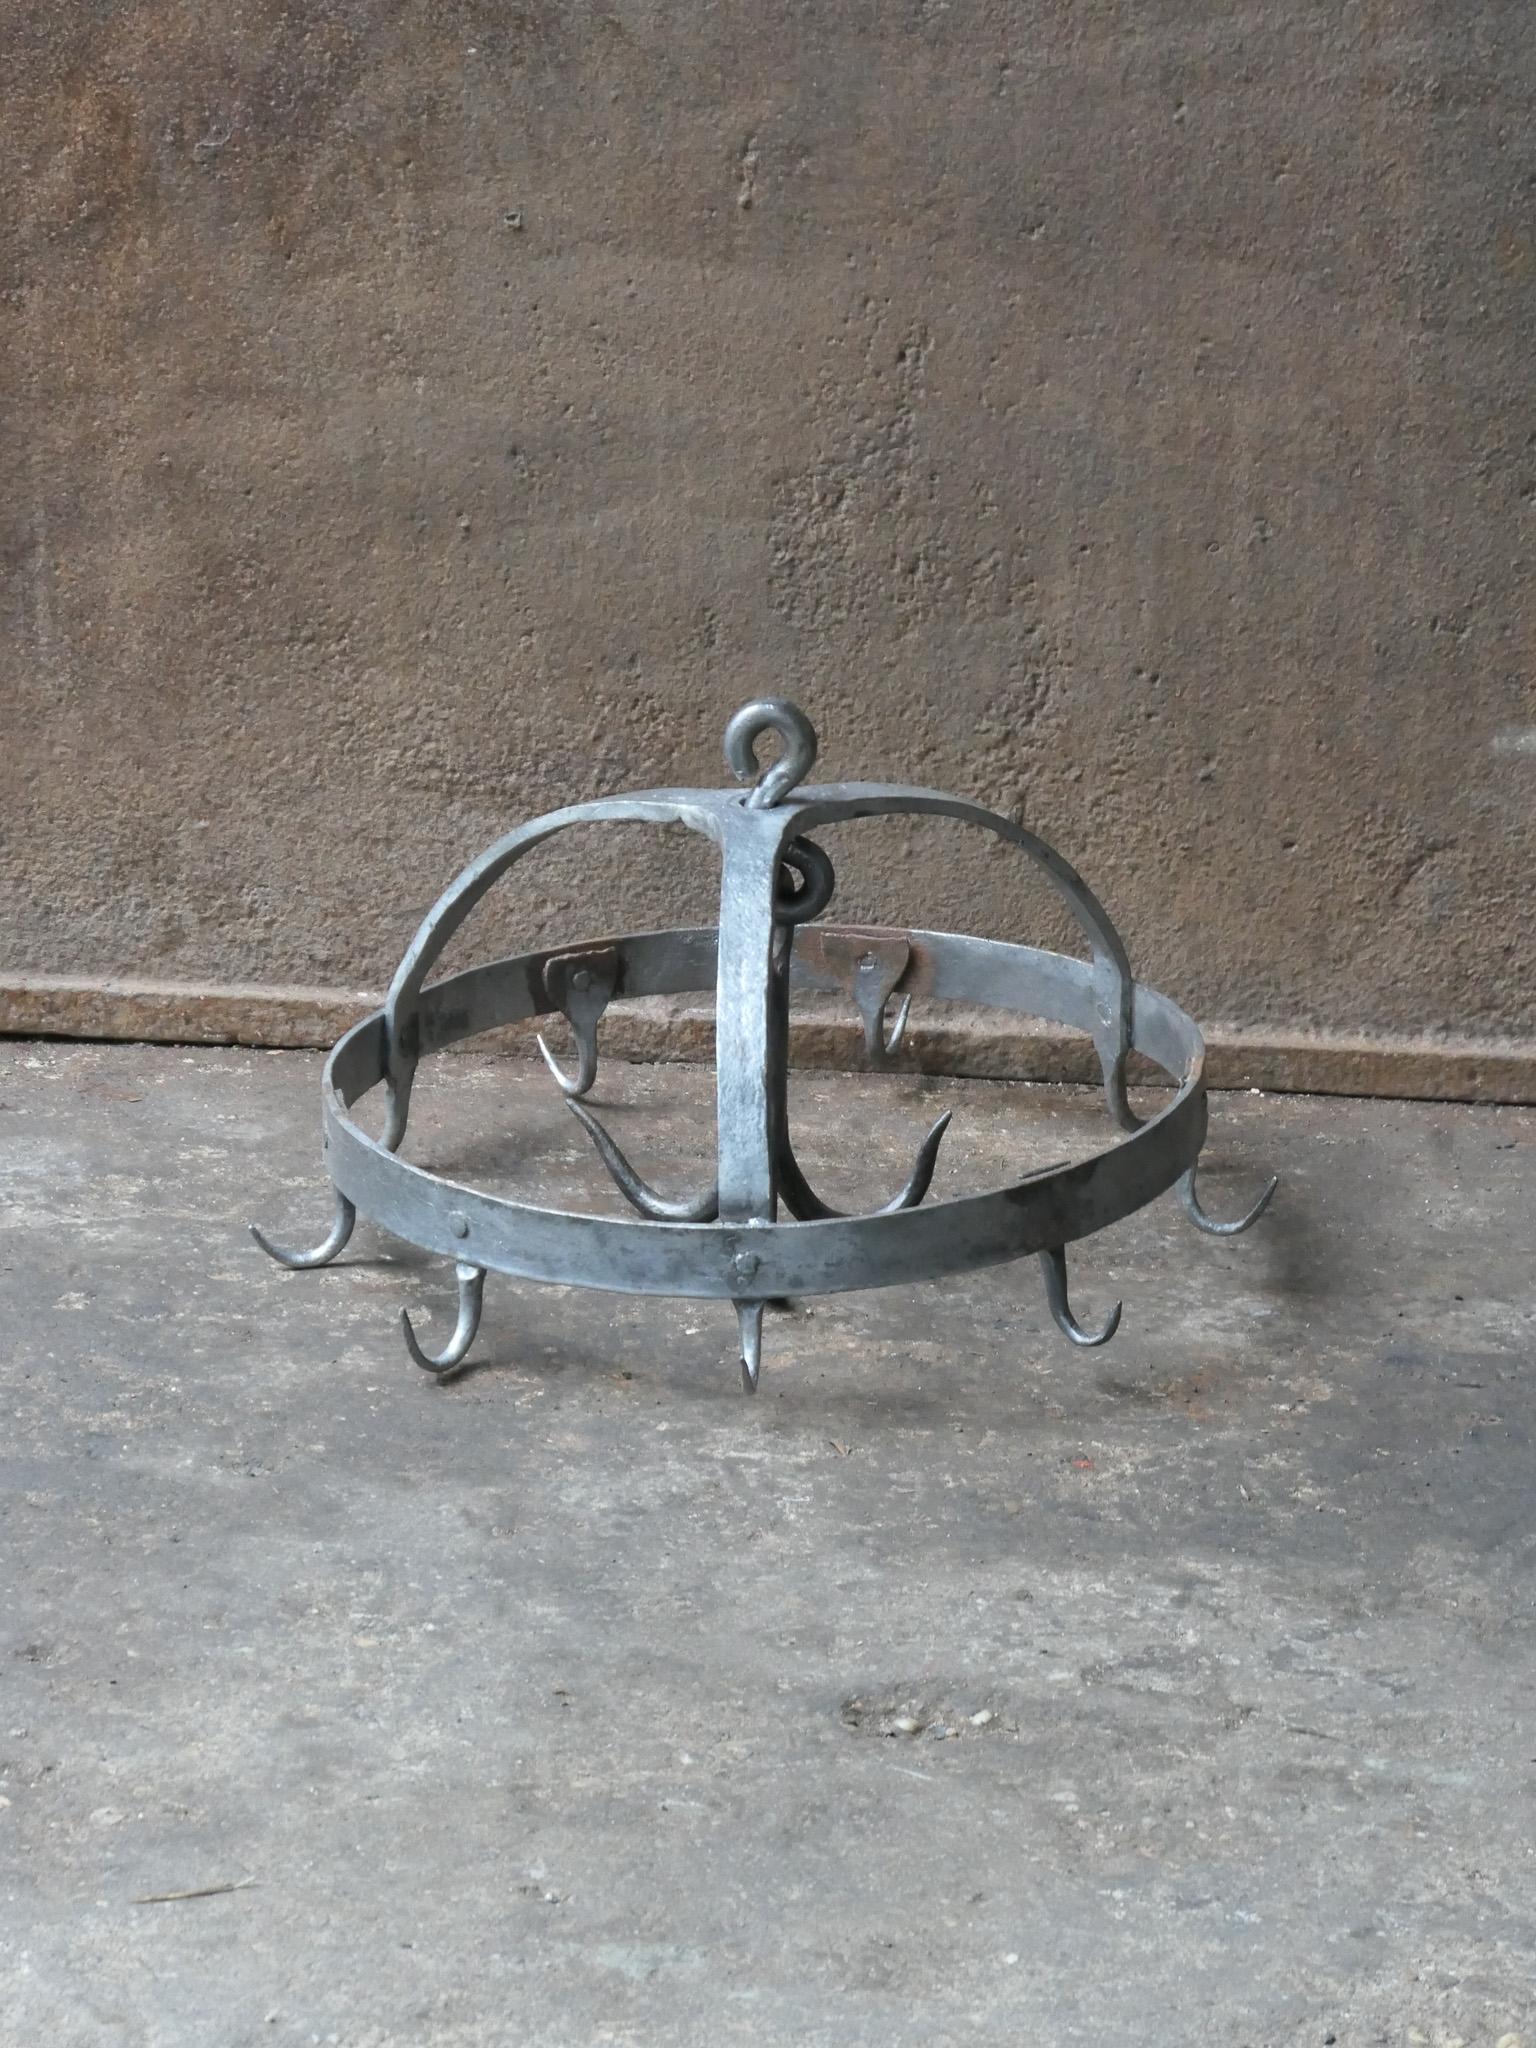 18th century French Louis XV game rack used for hanging game and birds. Can nowadays also be used for hanging various other items such as pots and pans. The crown is made of wrought iron and is in a good condition.